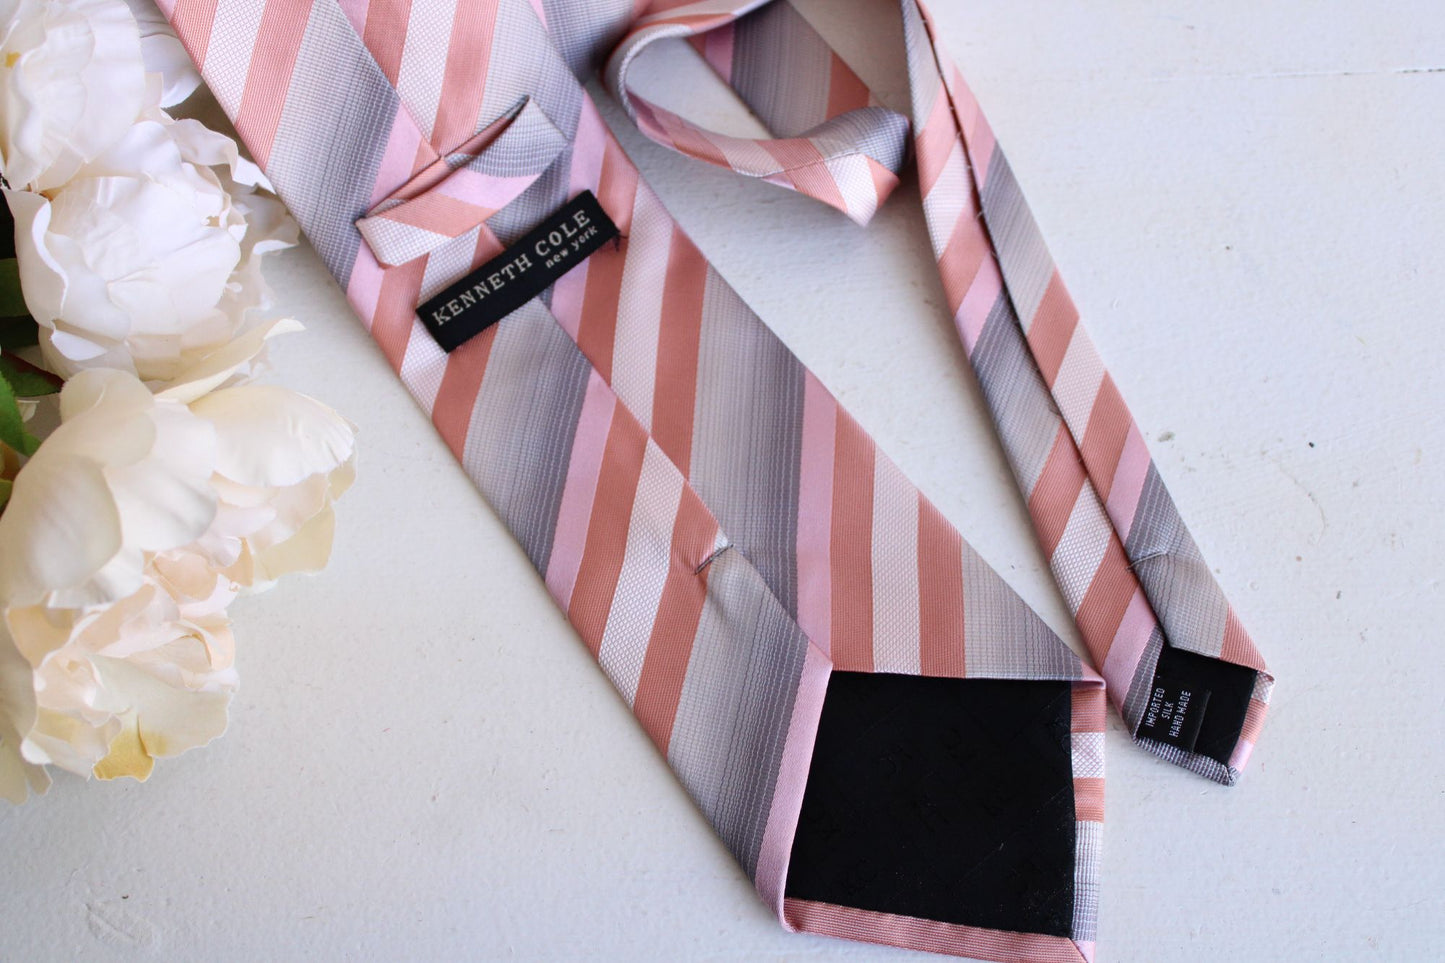 Kenneth Cole Tie, Silk, Peach, Gray and Pink Diagonal Stripes,  62" Long